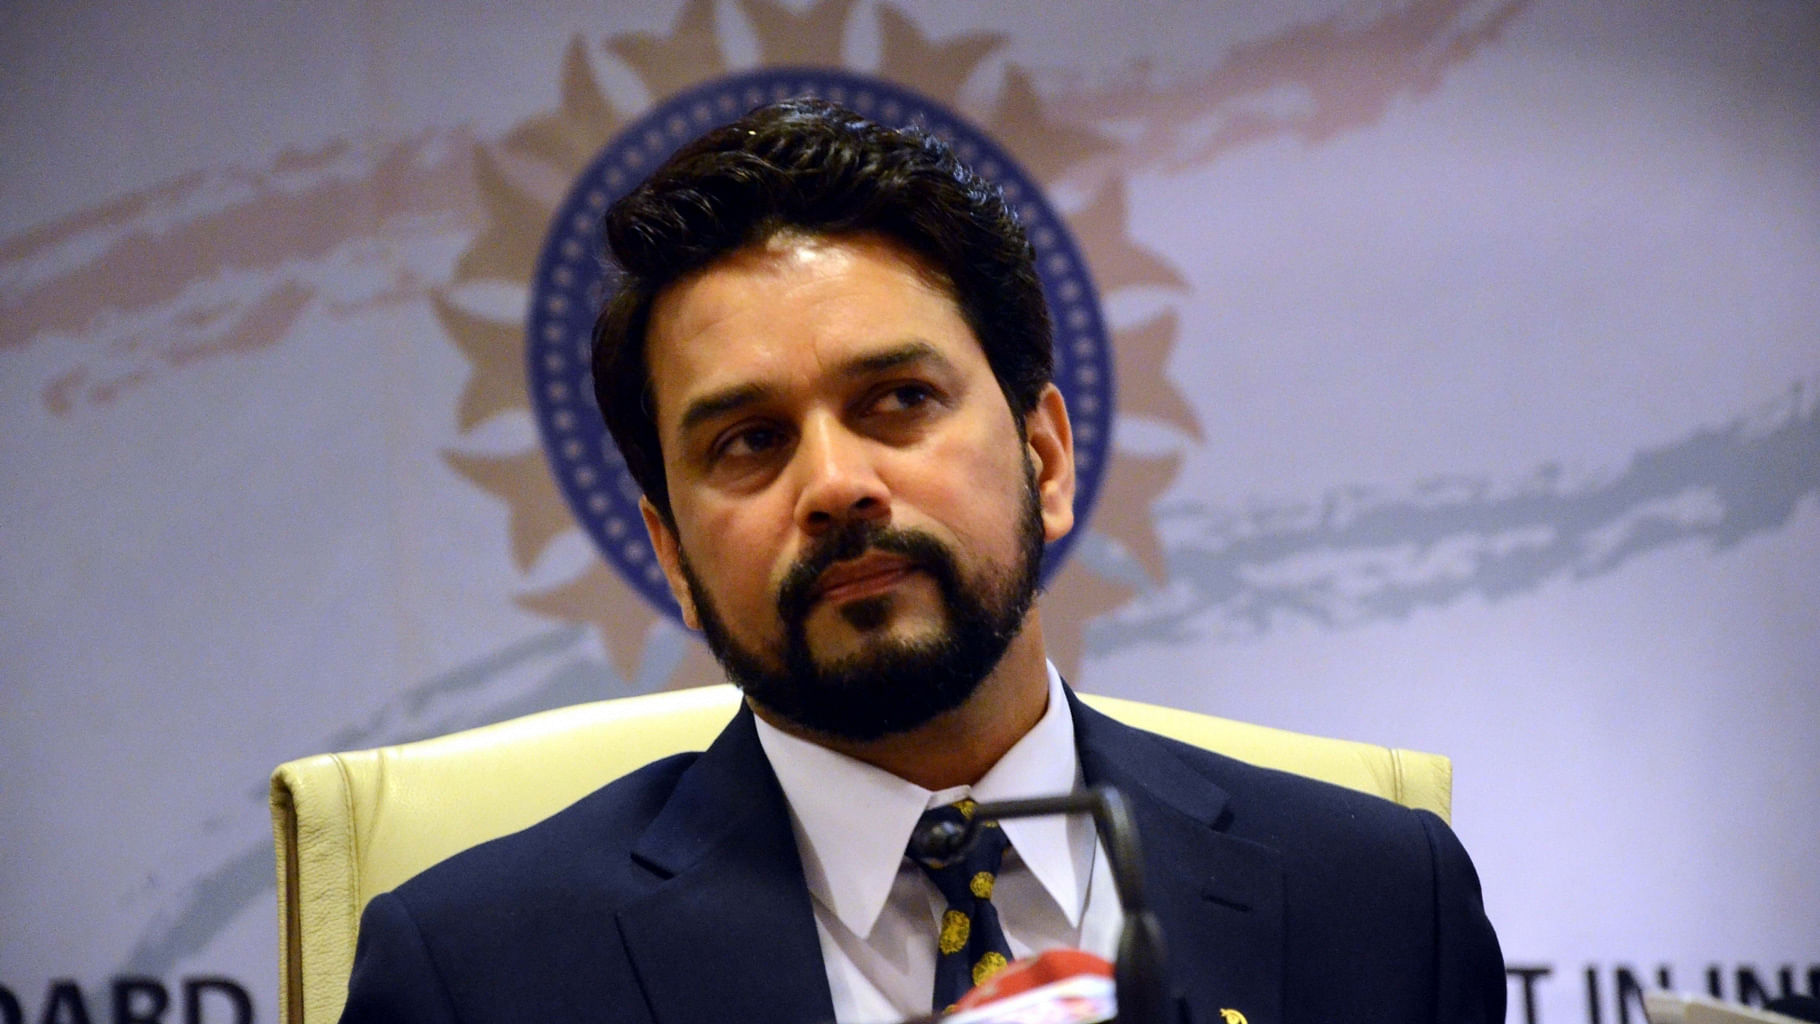 

BCCI president Anurag Thakur addresses a press conference in Mumbai on 21 May 2016. (Photo: IANS)